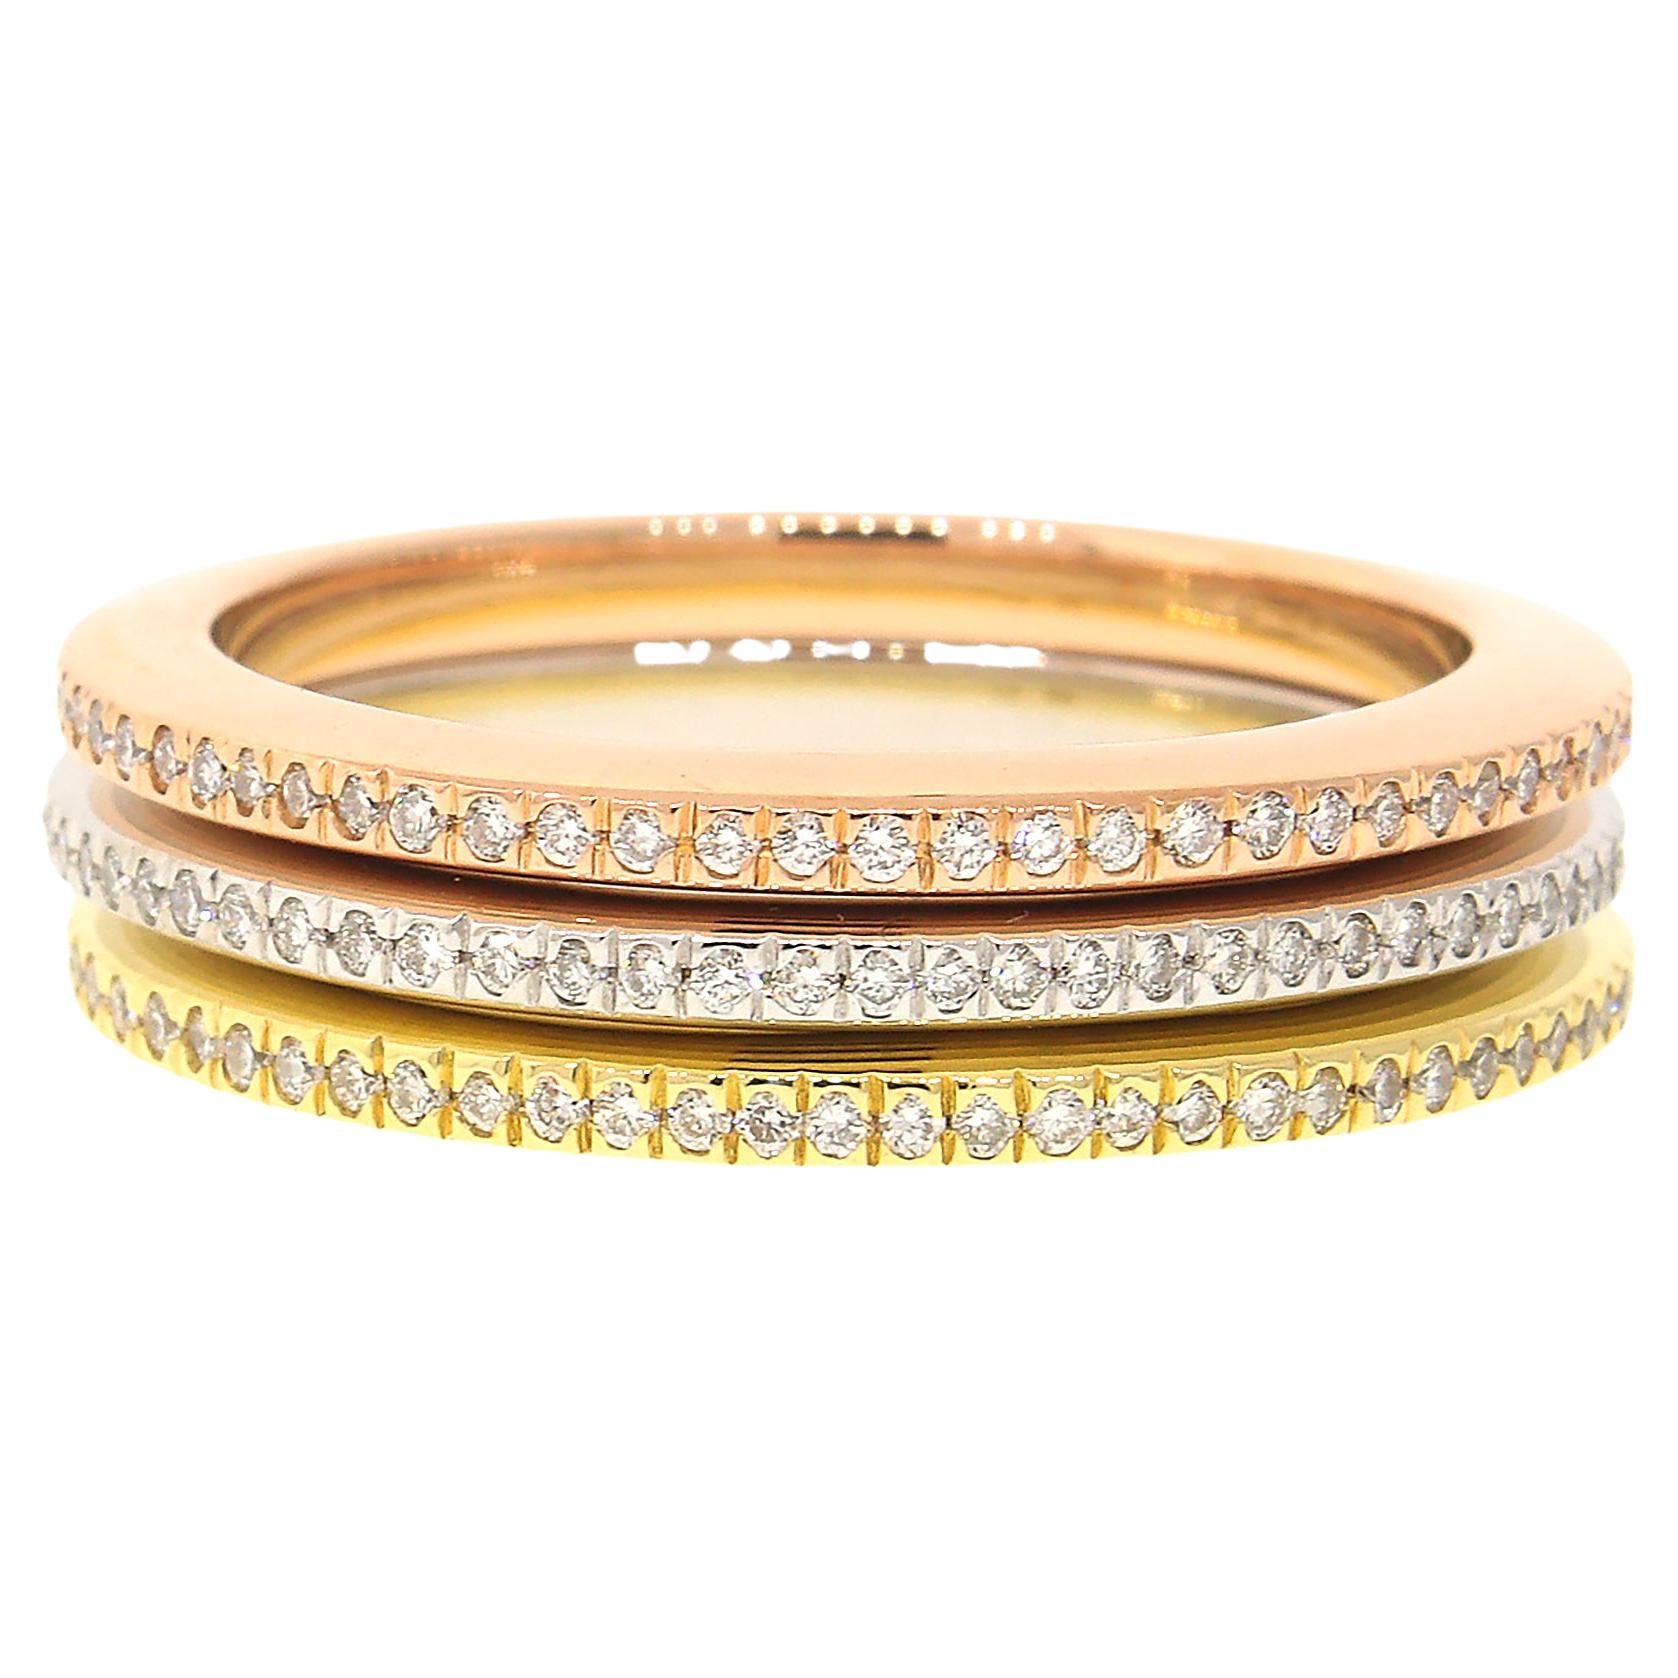 Multi-Tone Gold Diamond Stackable Ring